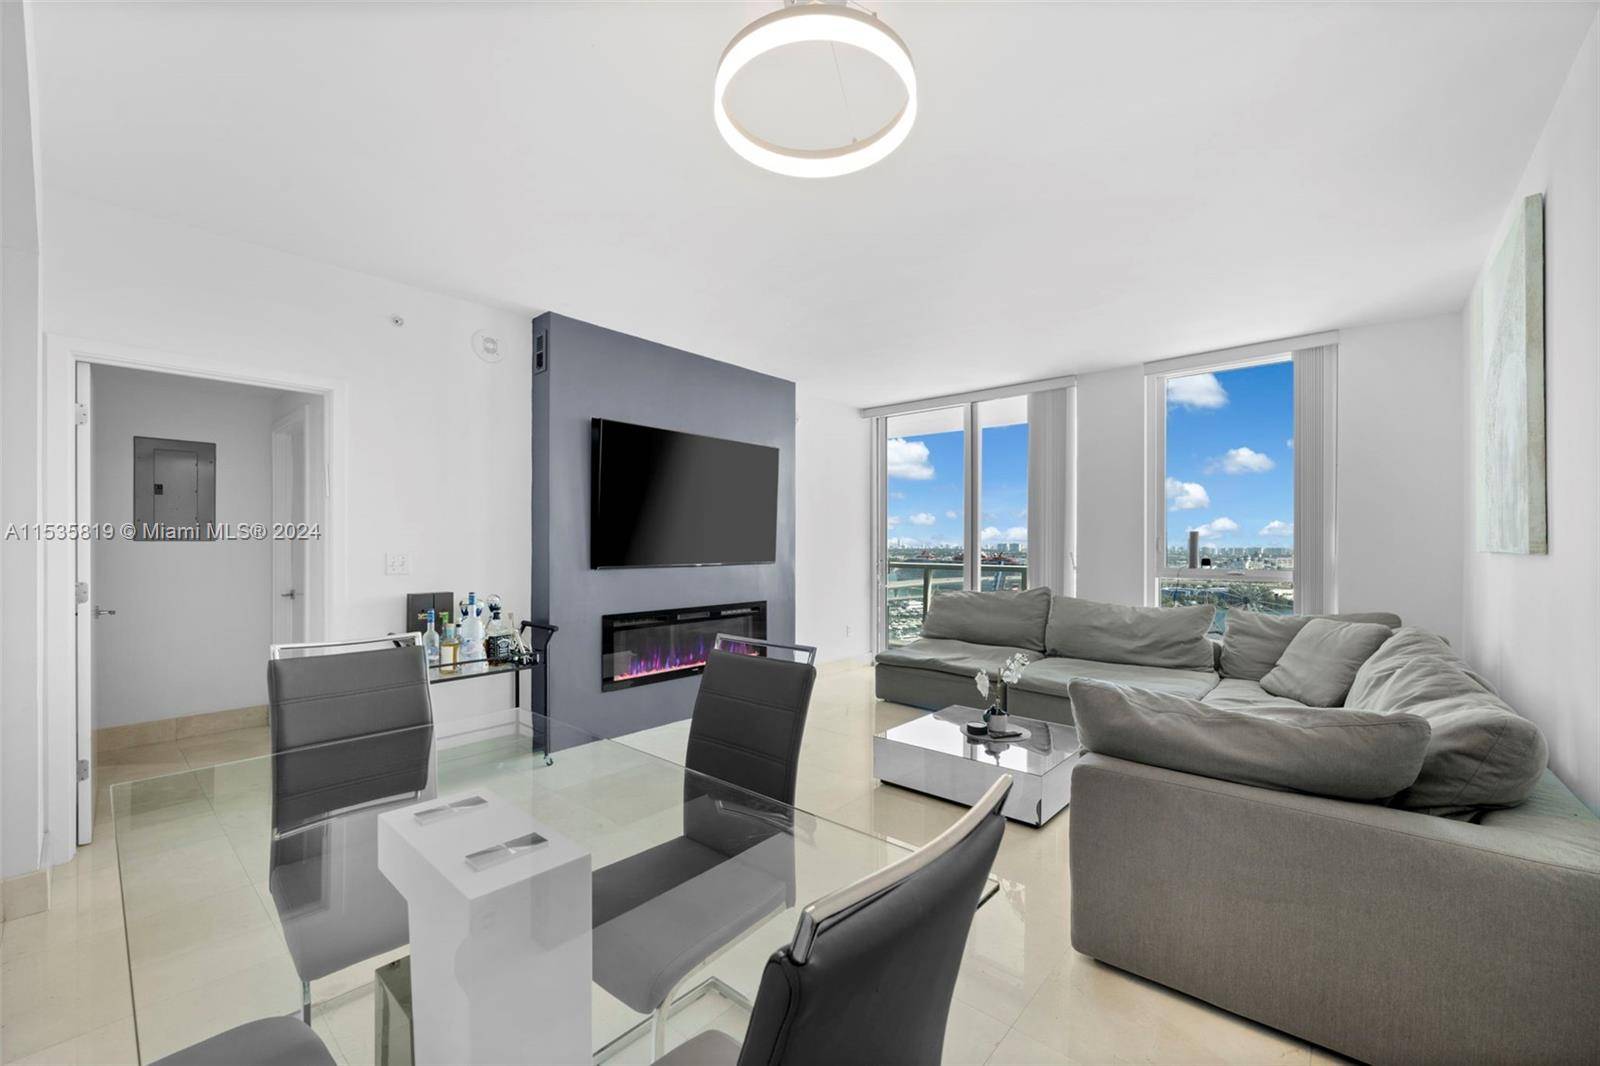 Welcome to your urban sanctuary in the heart of vibrant Downtown Miami.